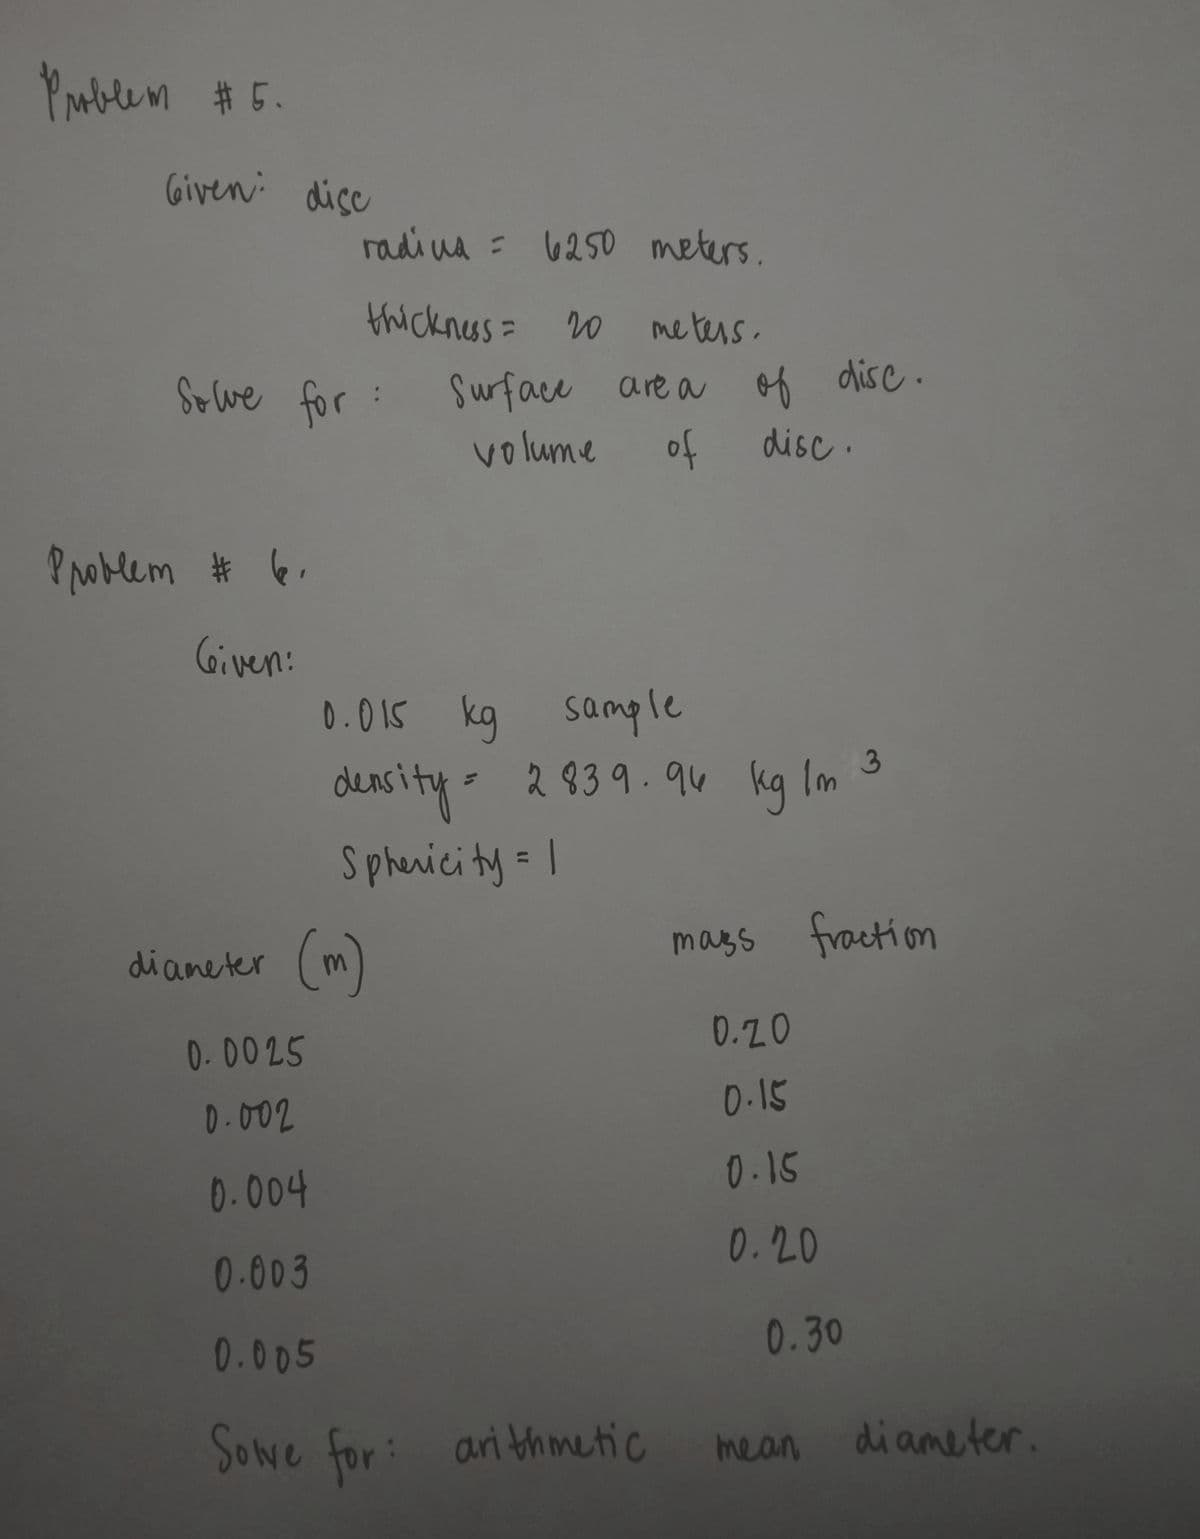 Parblem #5.
Given: dicc
radi ua = 6250 meters.
thickness= 20
meters.
Sewe for :
Surface are a of disc .
volume
of
disc.
P oblem # 6.
Given:
0.015 kg sample
2839.94 kg Im 3
deasity-
Sphenicity = I
diameter (m)
mags fraction
0.20
0-0025
0.15
D-002
0.15
0.004
0.20
0-003
0.30
0.005
Sowe for:
ari thmetic
di ameter.
mean
